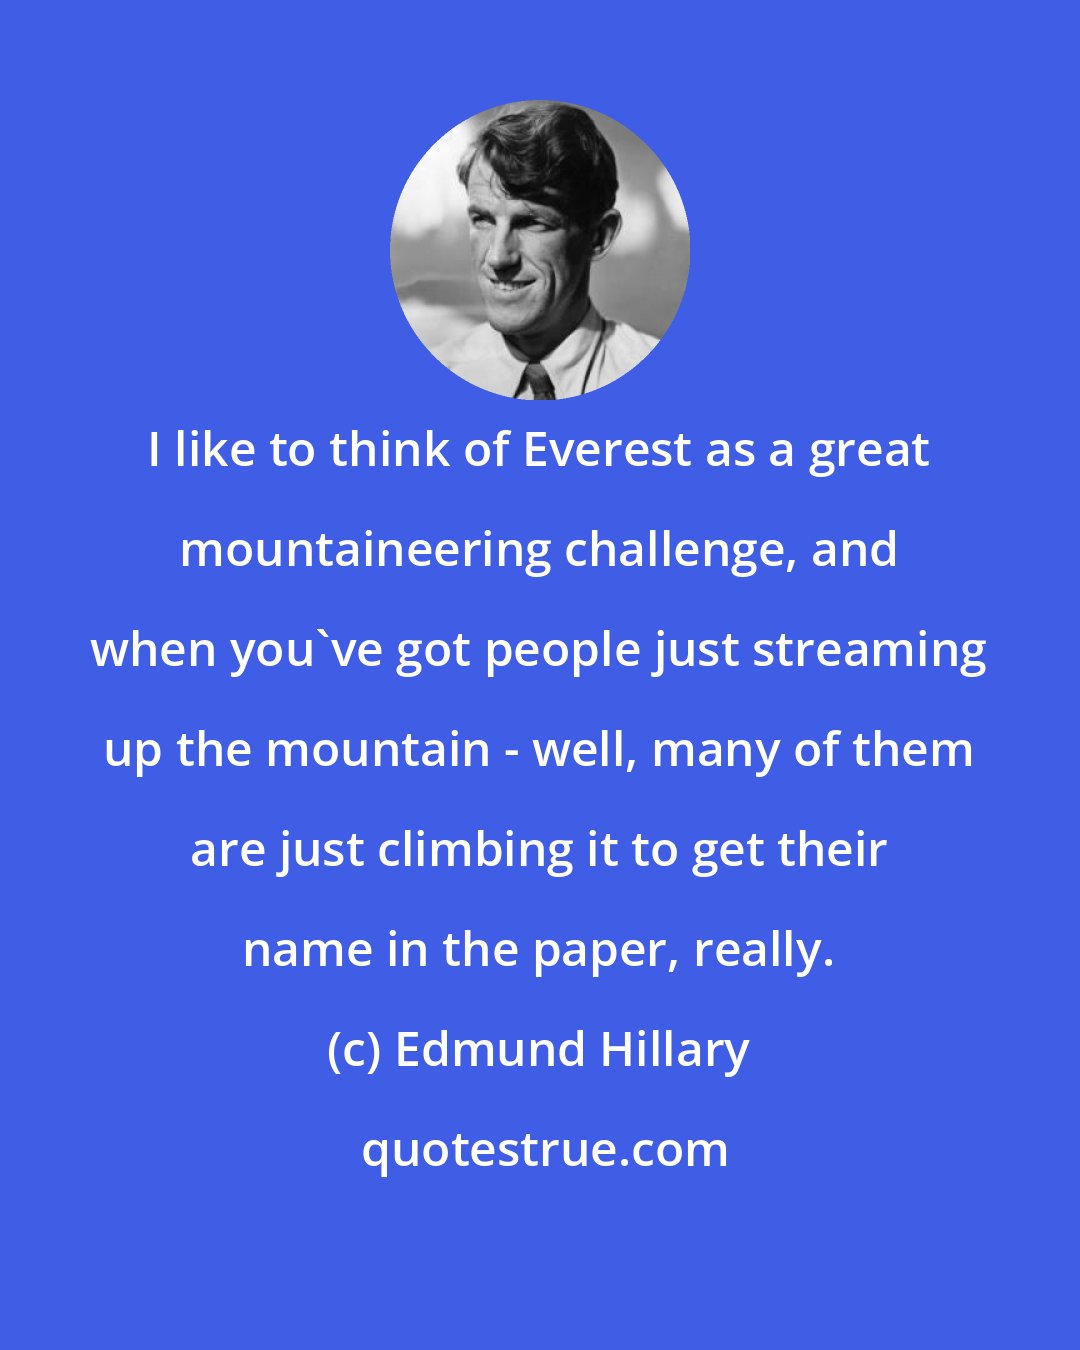 Edmund Hillary: I like to think of Everest as a great mountaineering challenge, and when you've got people just streaming up the mountain - well, many of them are just climbing it to get their name in the paper, really.